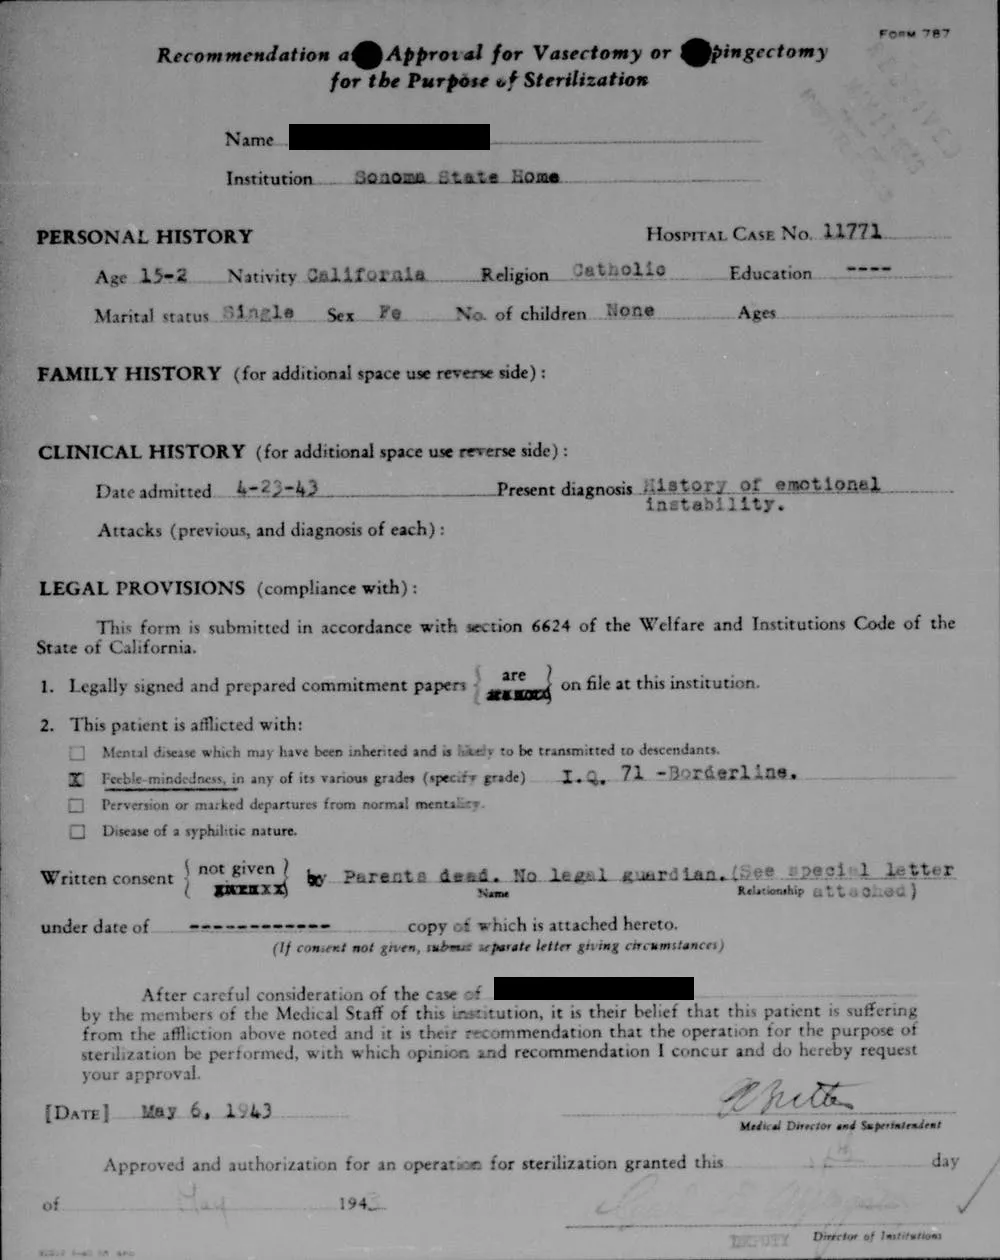 A sample sterilization form for a 15-year-old woman in California